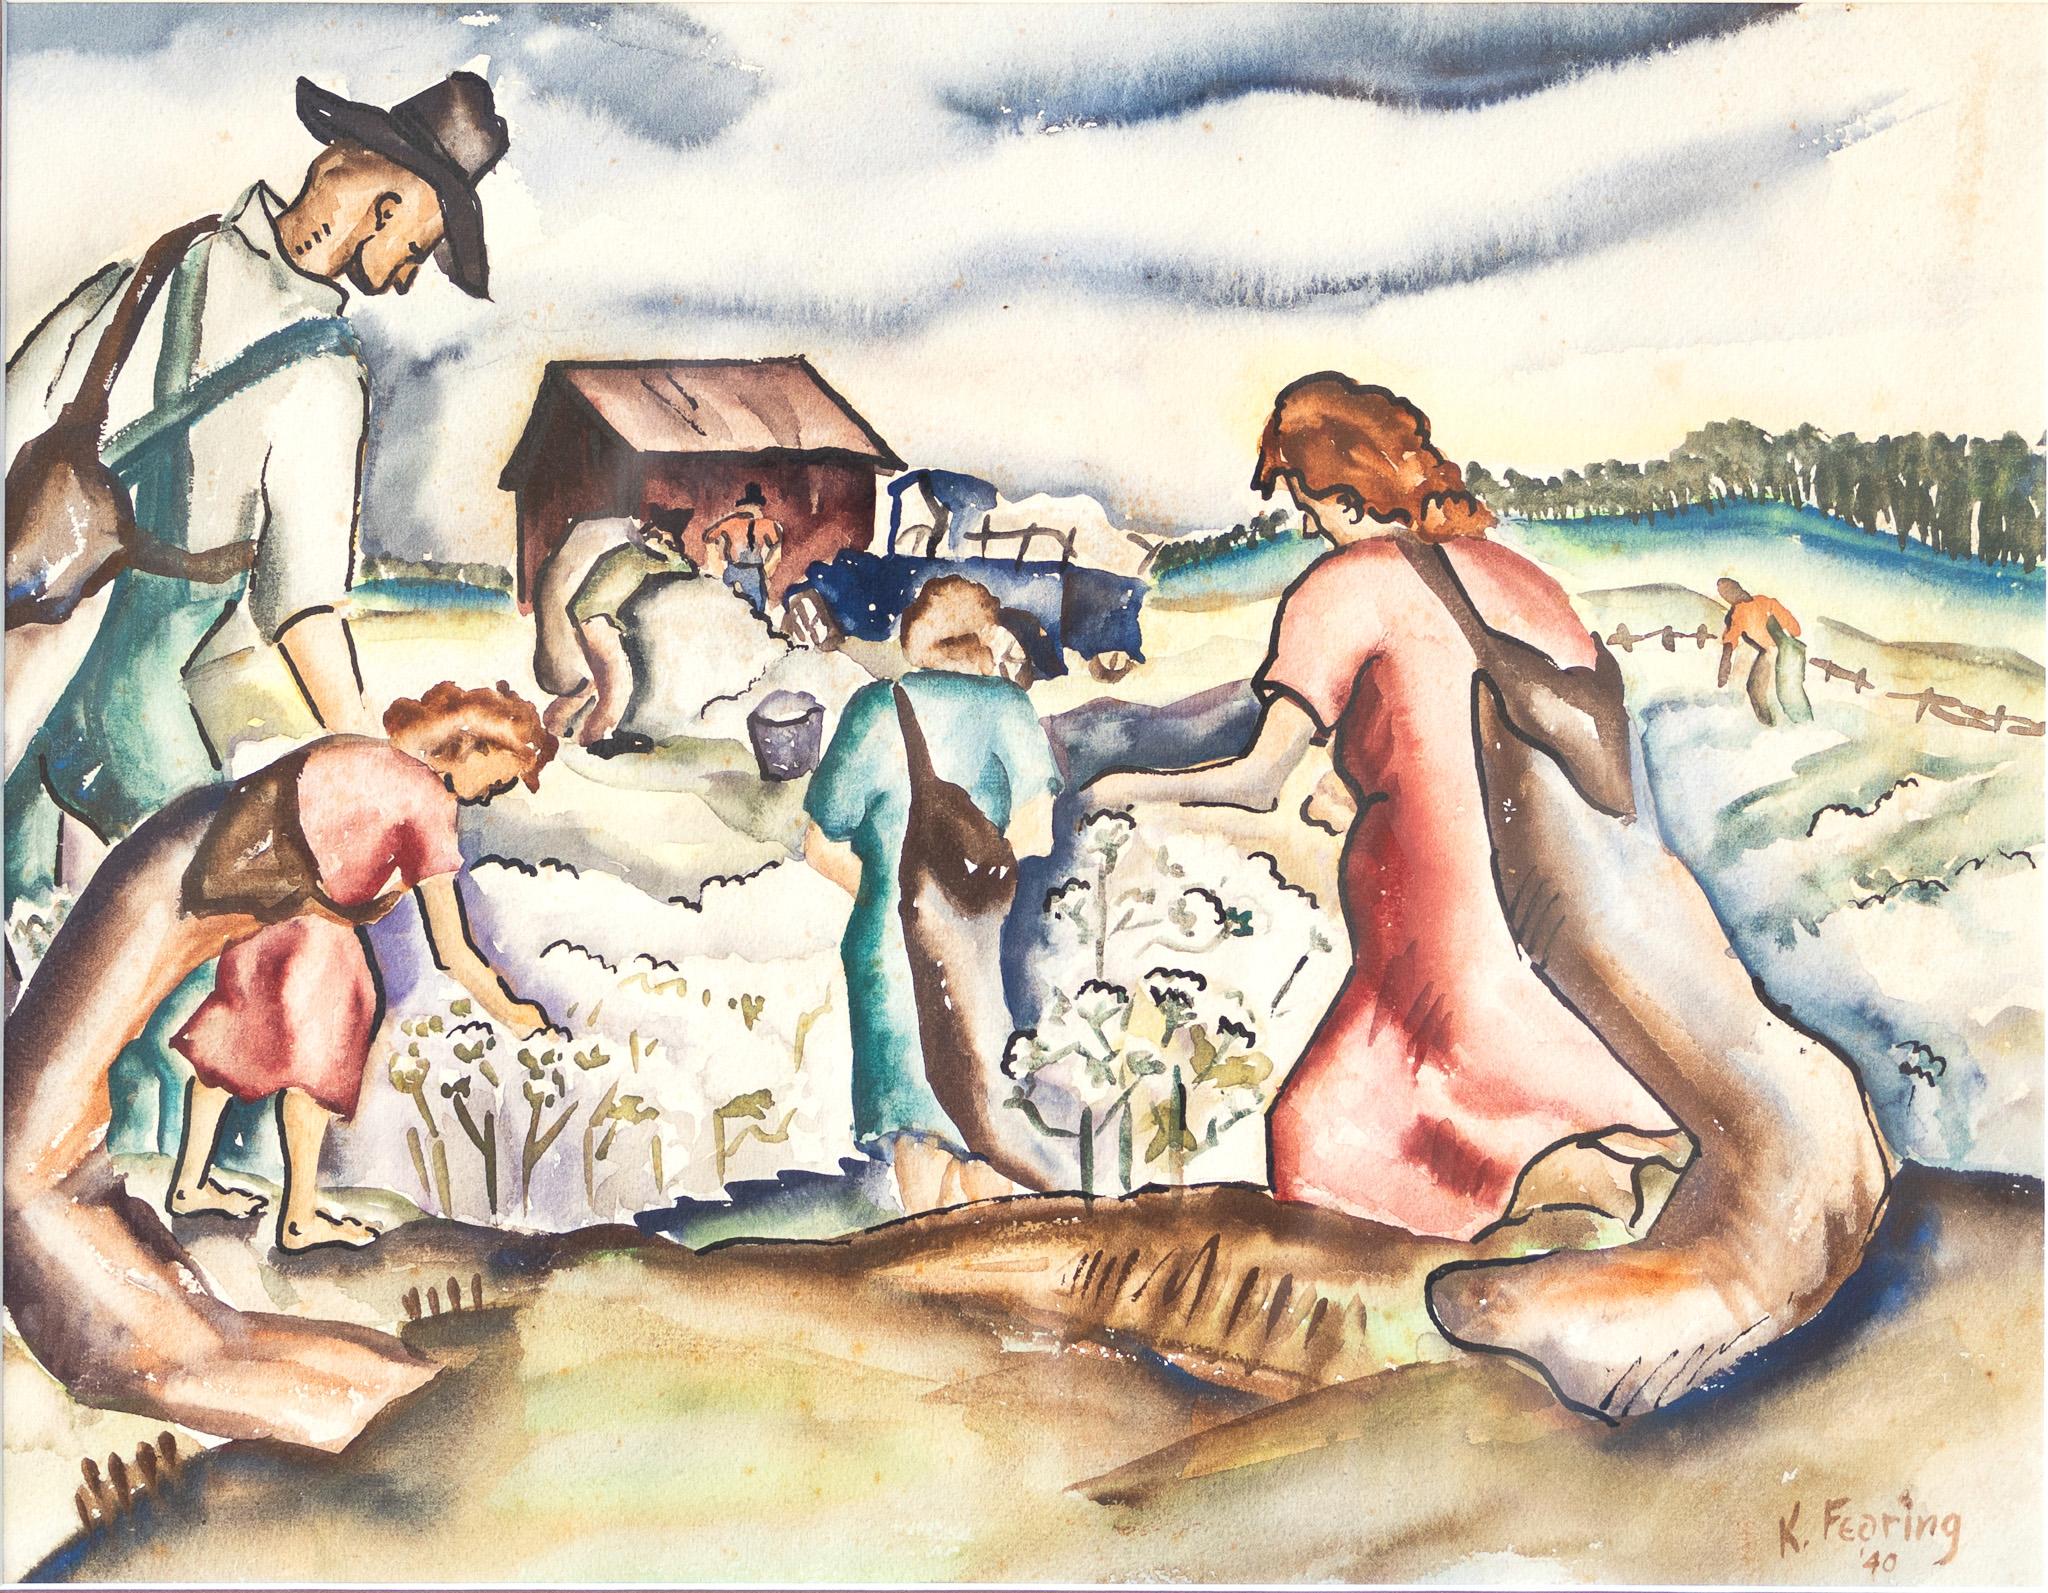 Kelly Fearing Figurative Art - "Sharecroppers" Watercolor Scene of Laborers Working in a Cotton Field